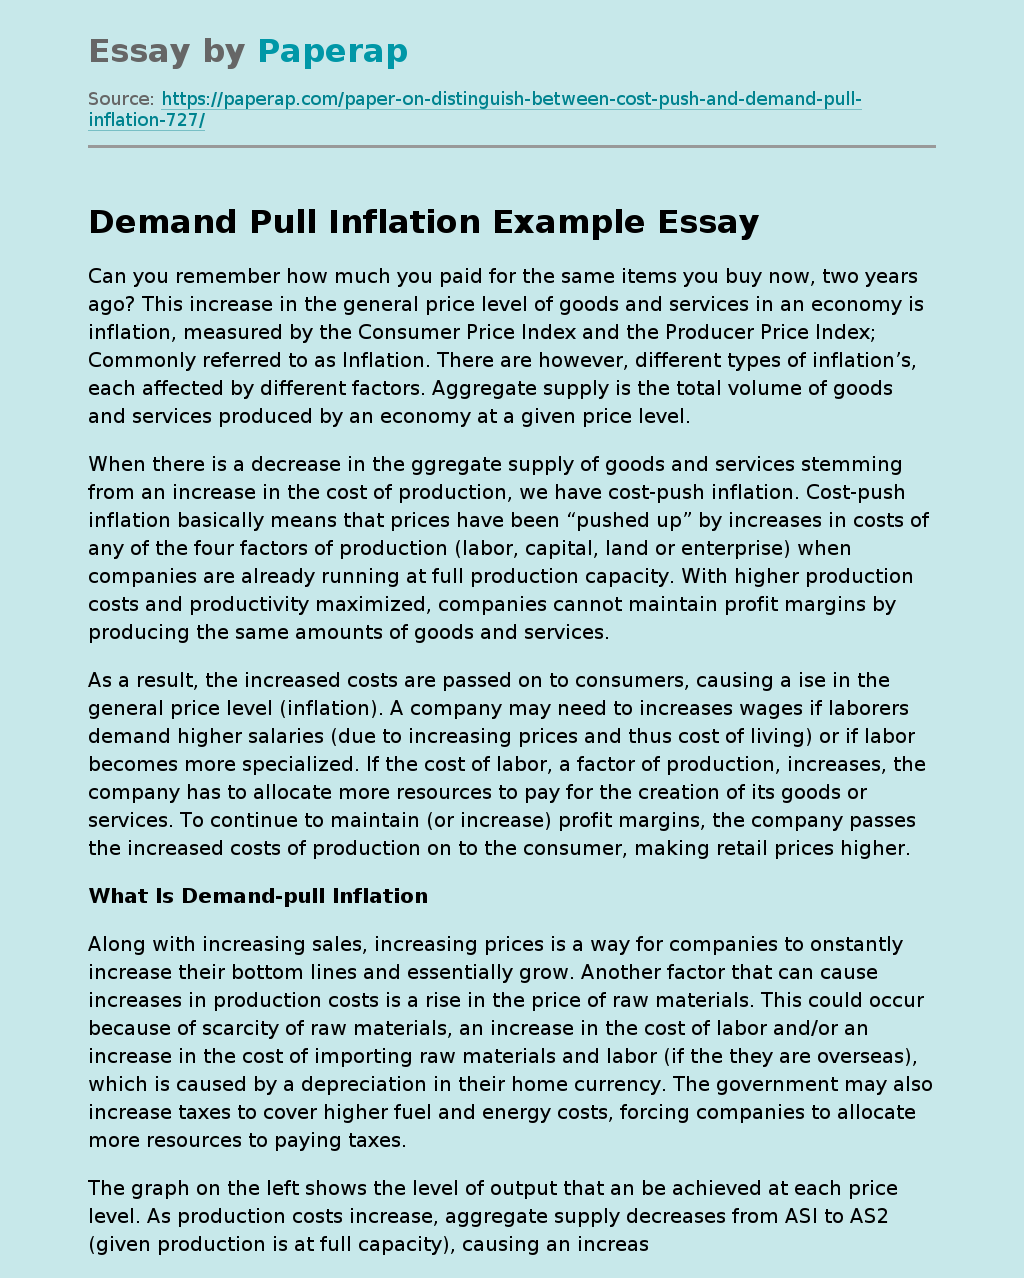 Demand Pull Inflation Example